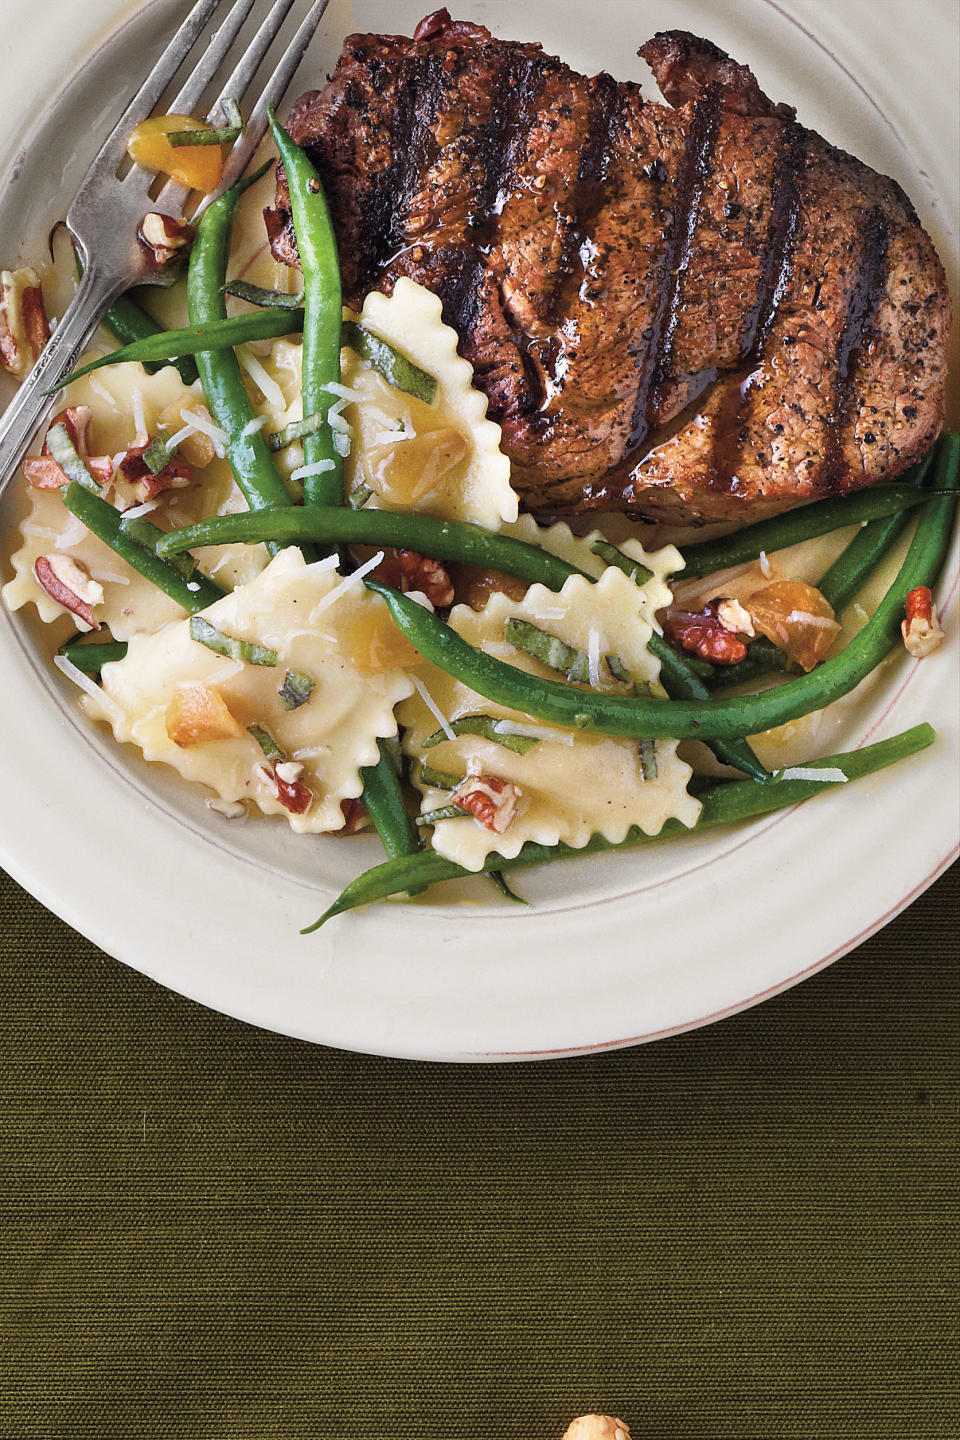 Grilled Fillets with Pecans and Green Bean Ravioli